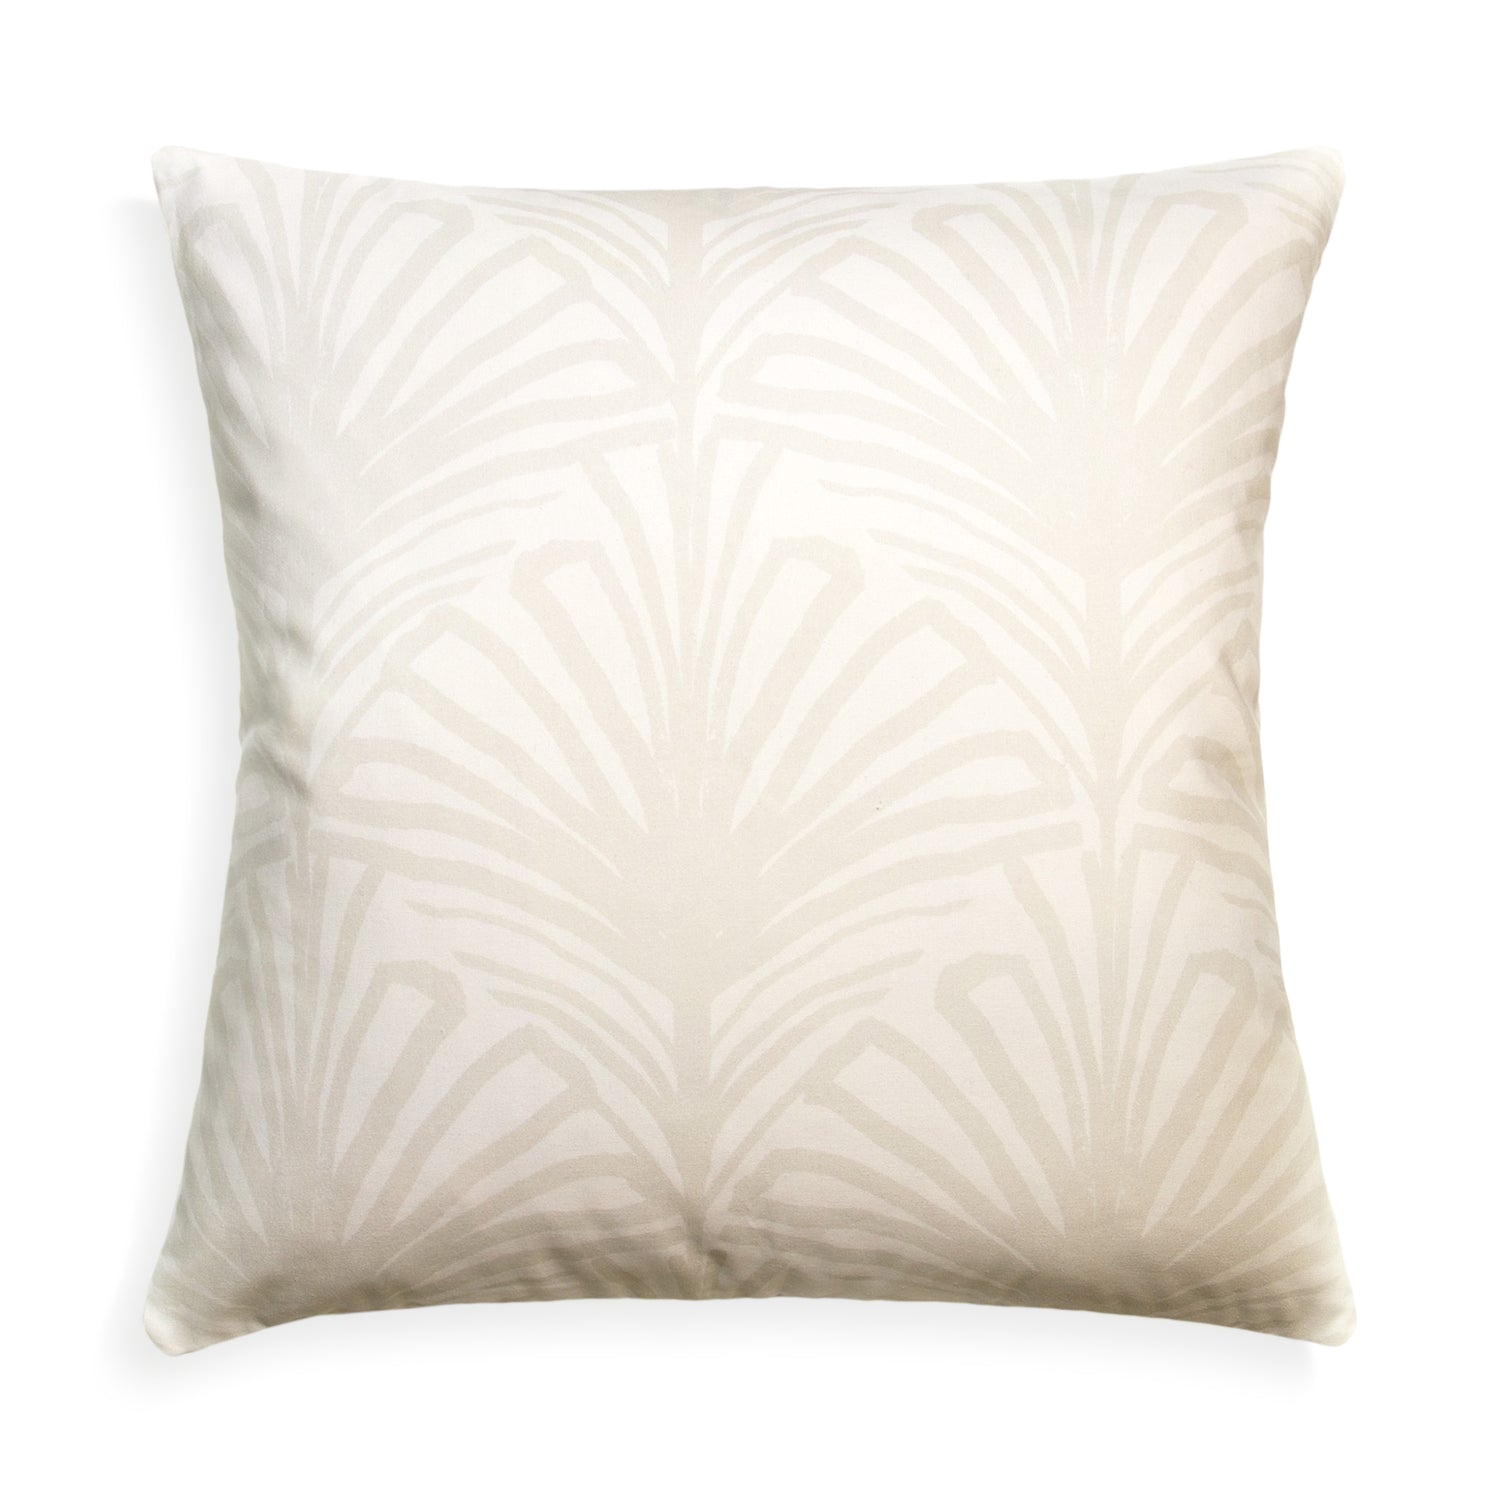 Beige Palm Printed Pillow